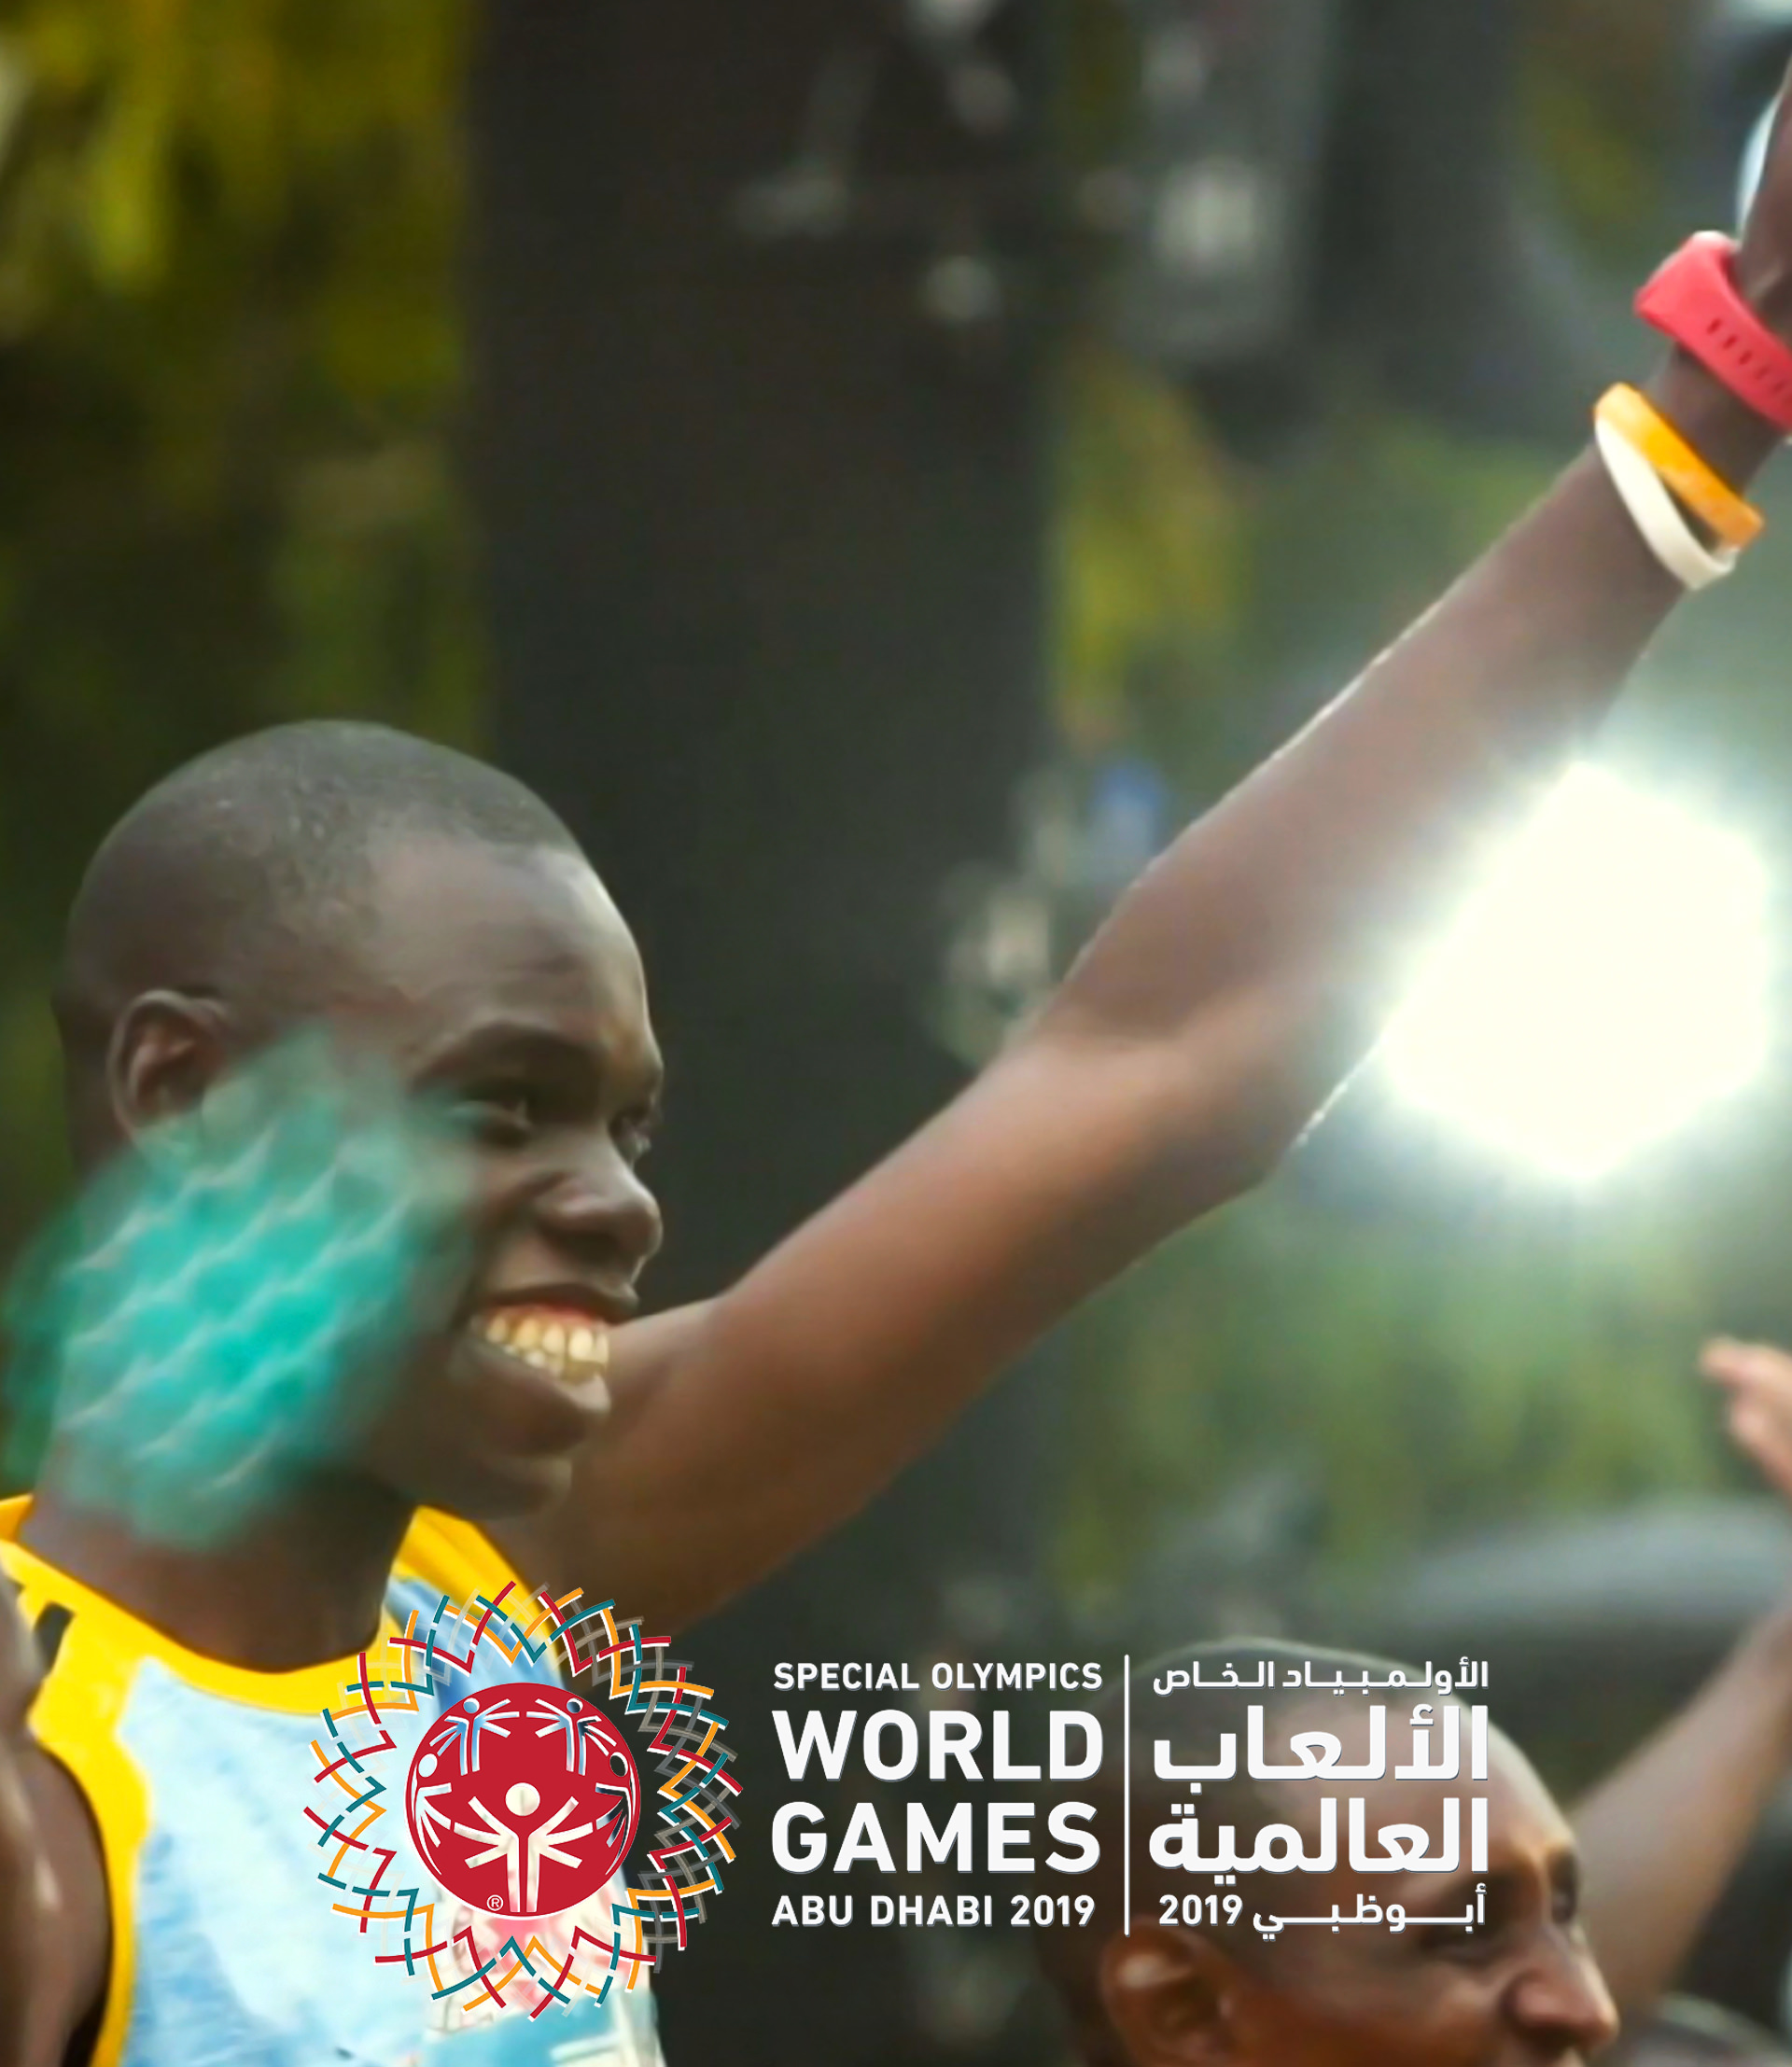 SPECIAL OLYMPICS WORLD GAMES 2019